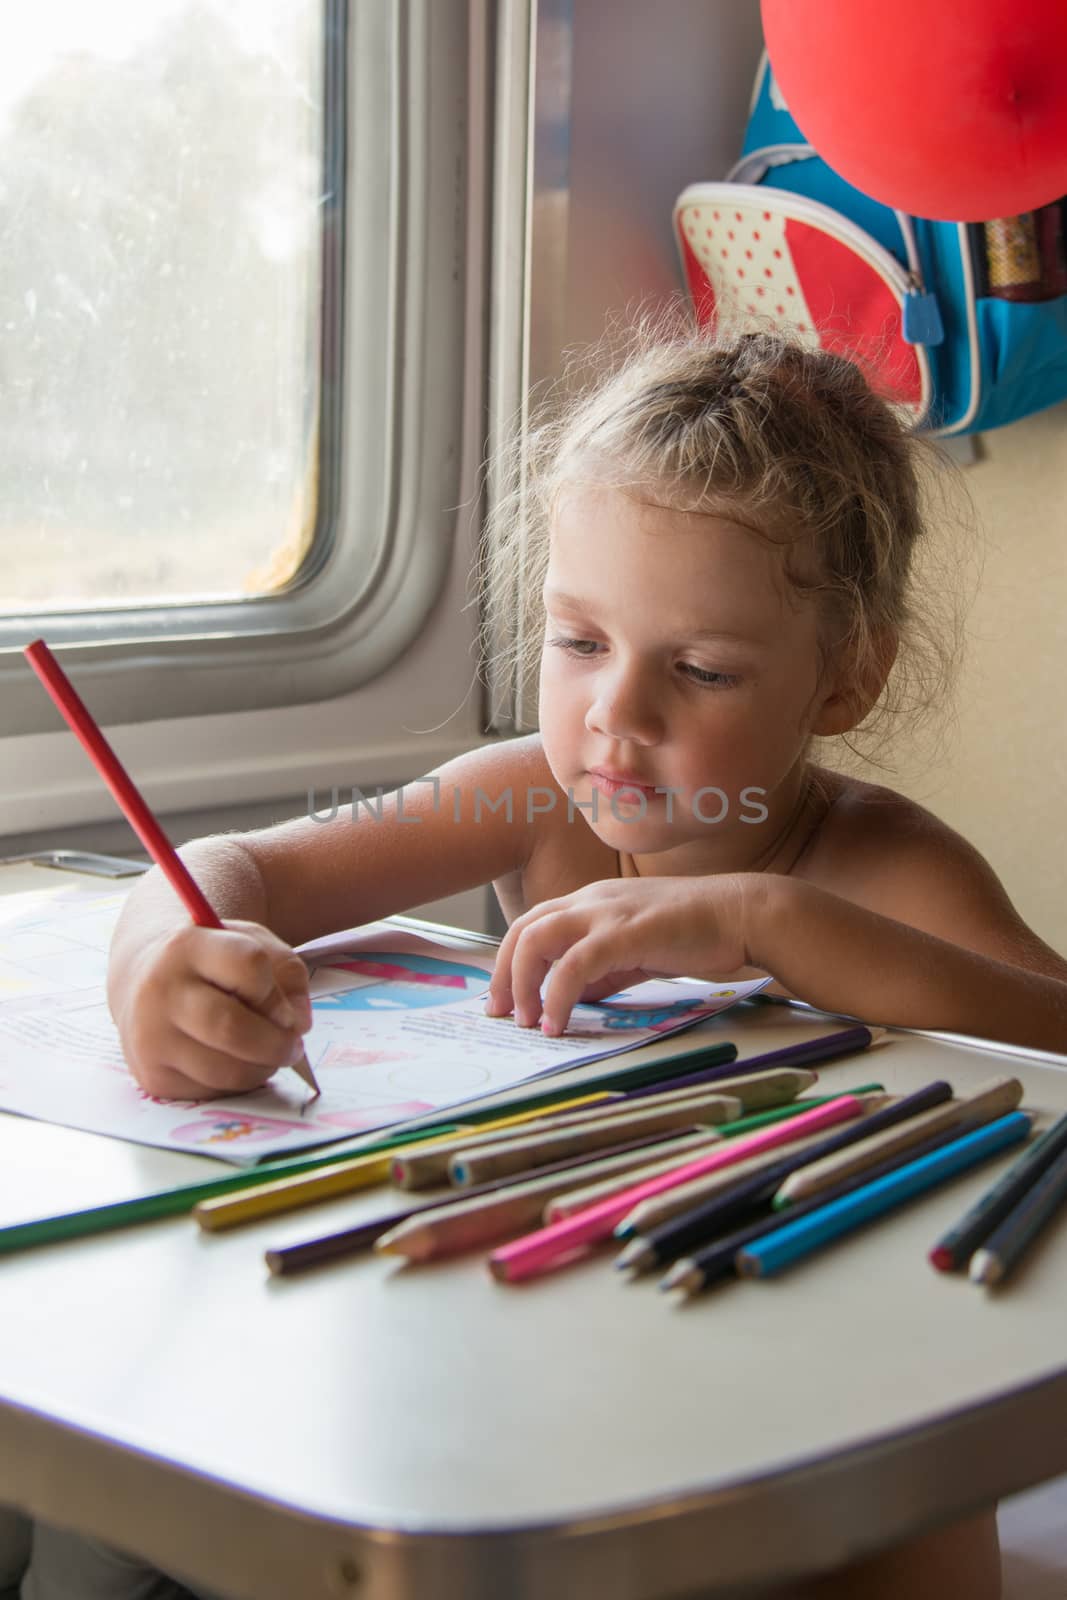 Four-year girl draws pencils in a magazine at the table while in the second-class train carriage